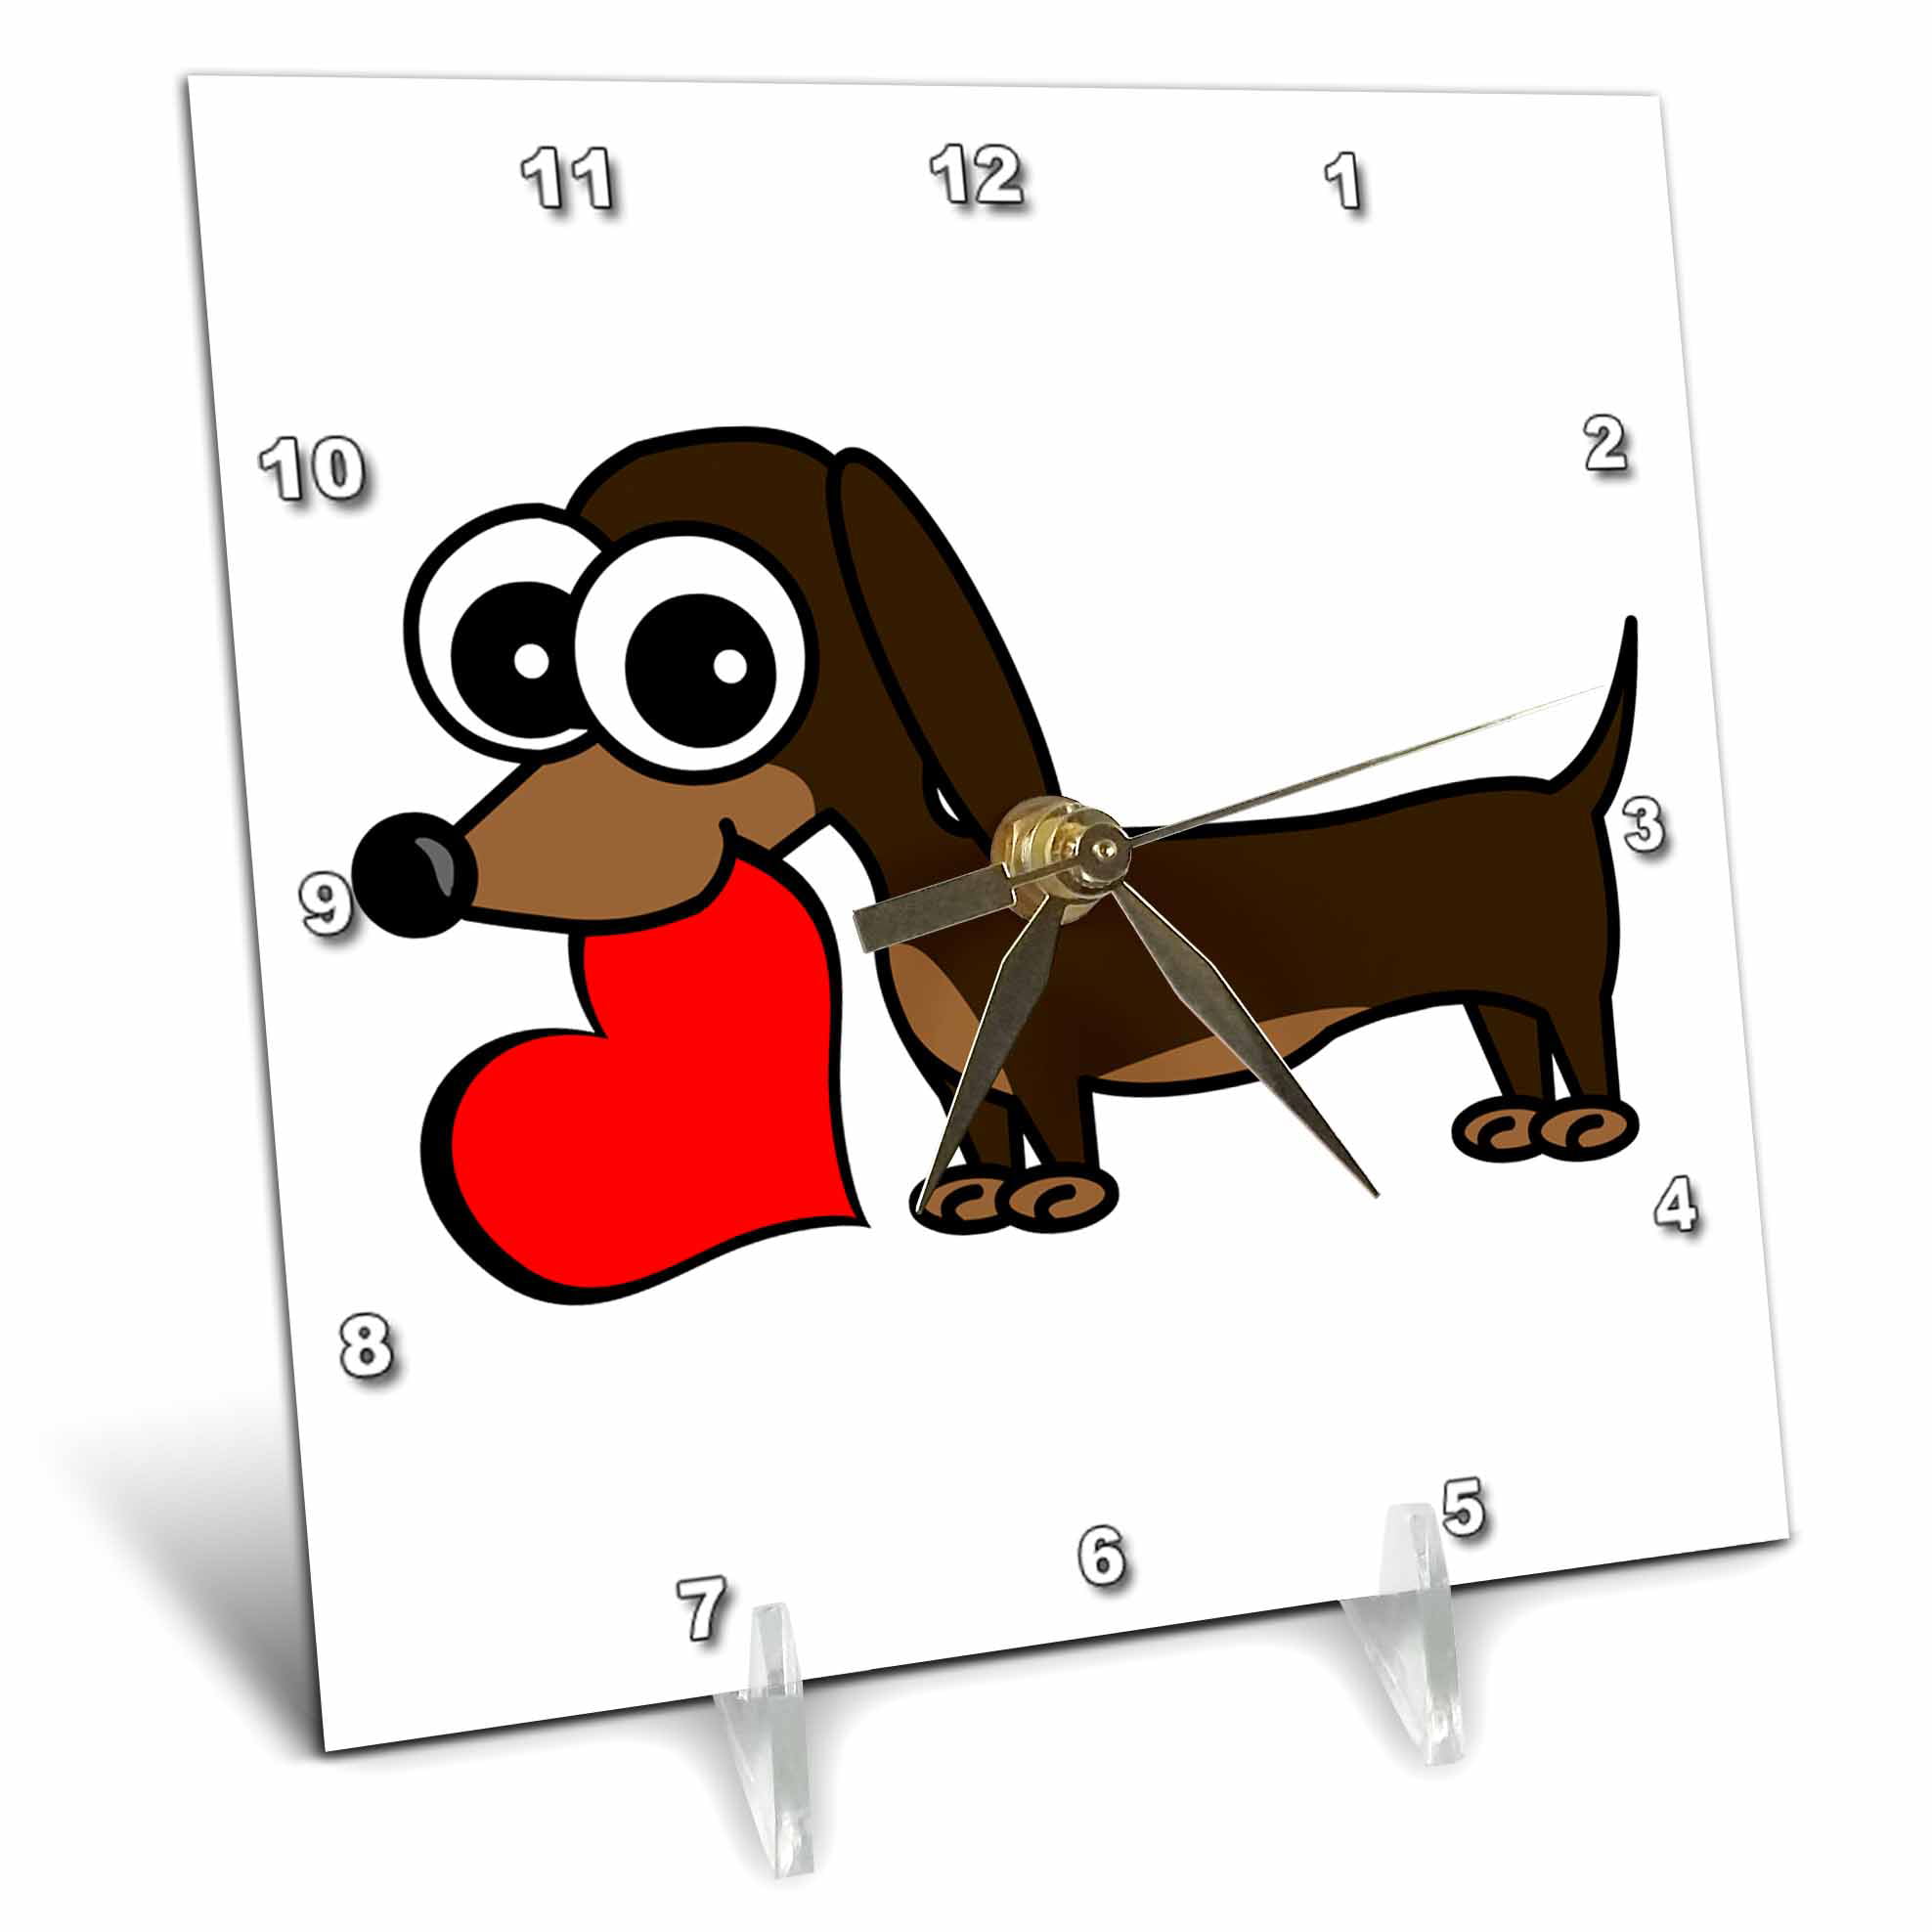 3dRose Weiner Dog with a Sharks Fin-Desk Clock dc_164020_1 6 x 6 6 by 6-inch